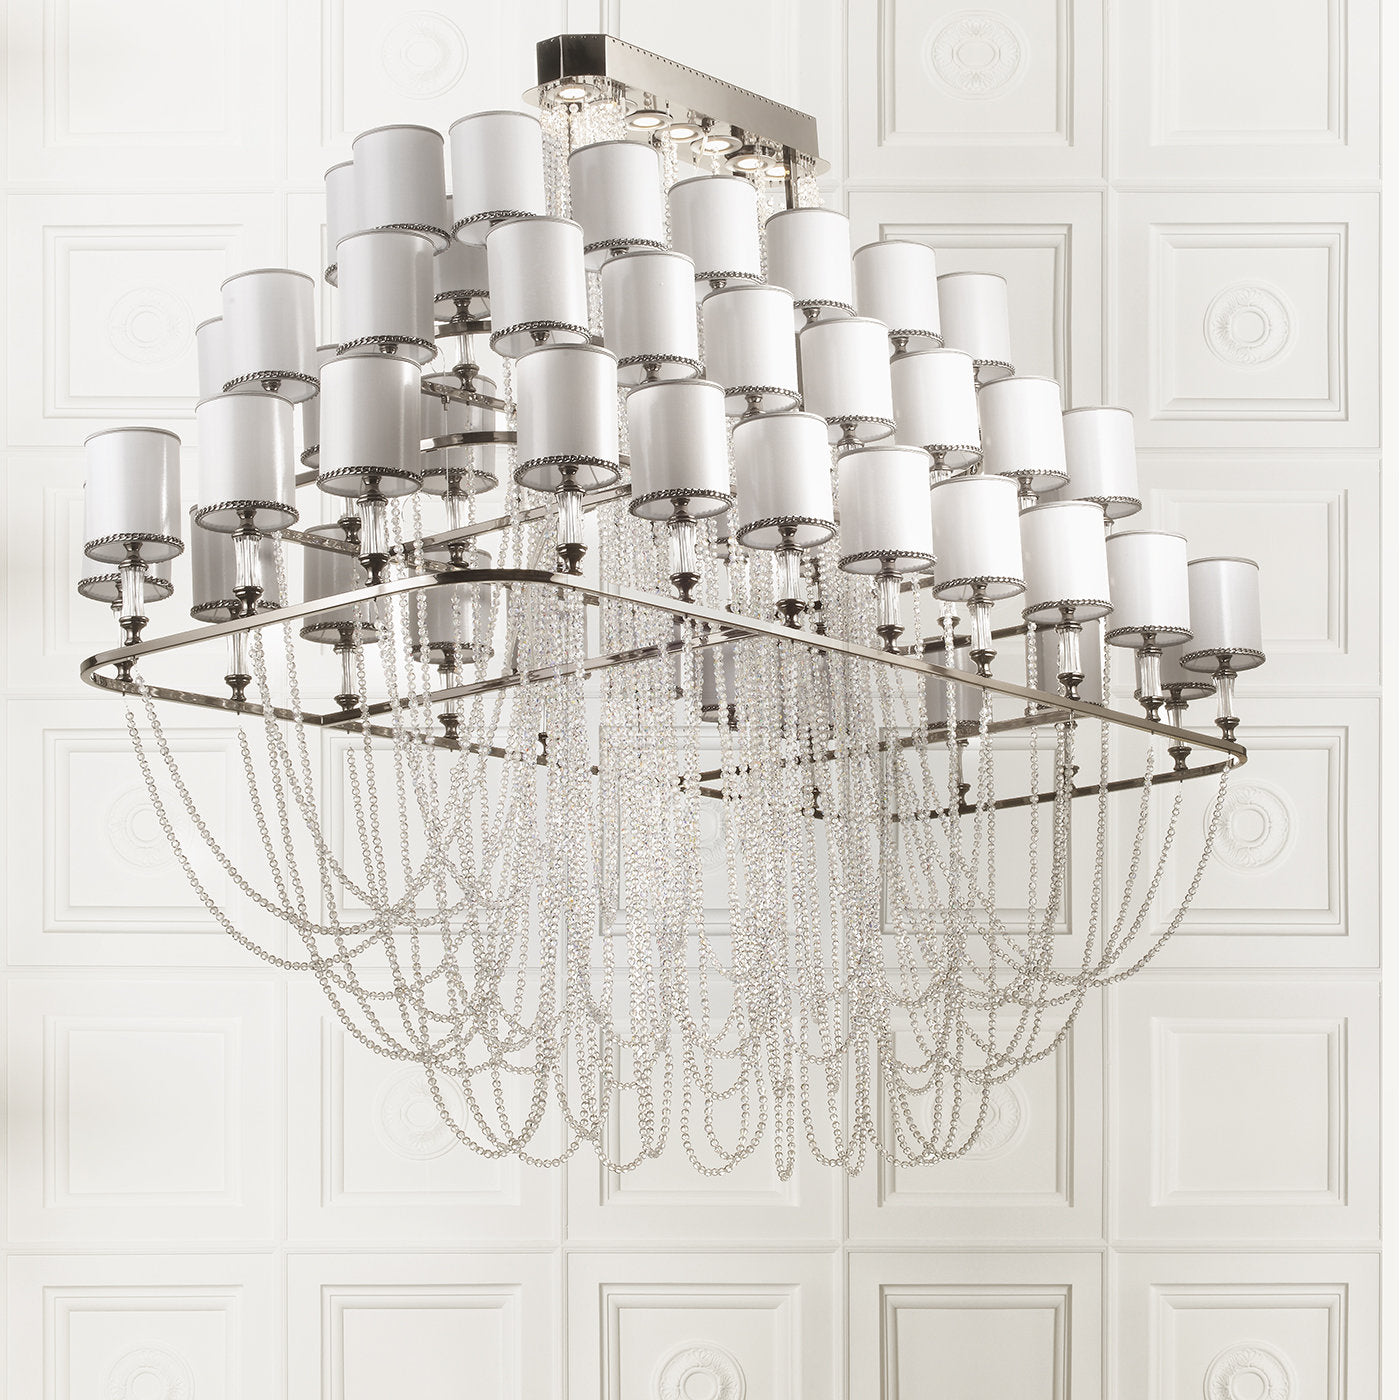 Oversized Metal and Crystal Chandelier - Alternative view 1